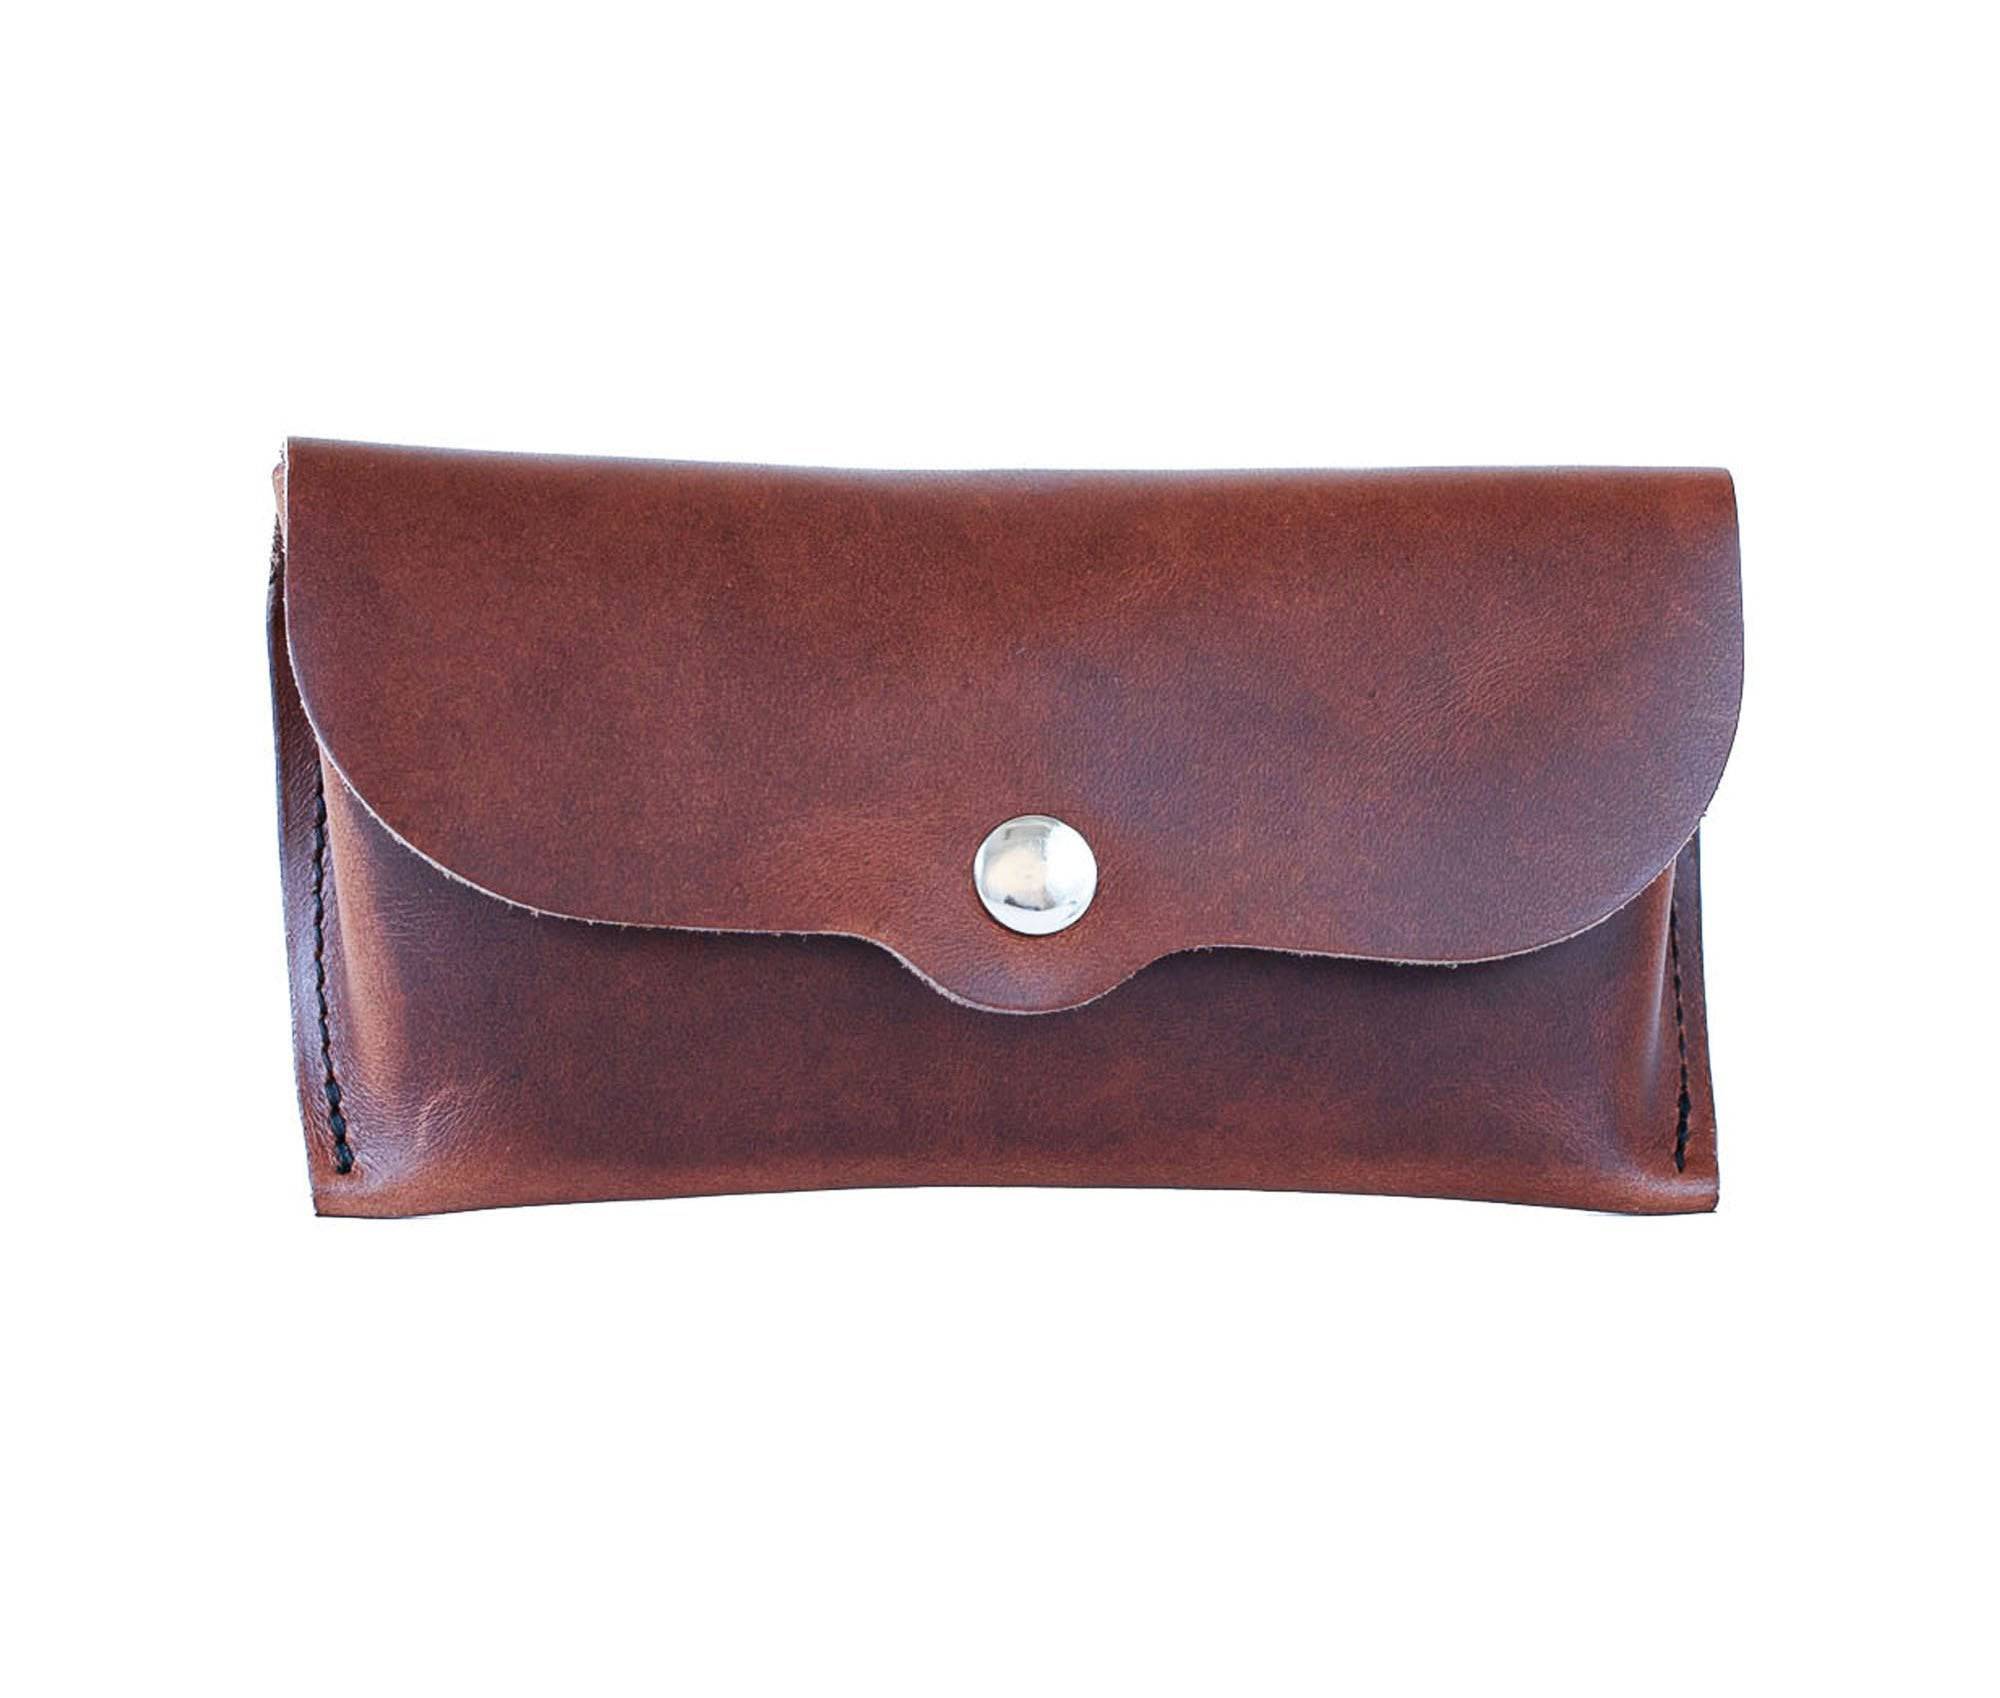  Eyeglasses Case by Lifetime Leather Co Lifetime Leather Co Perfumarie